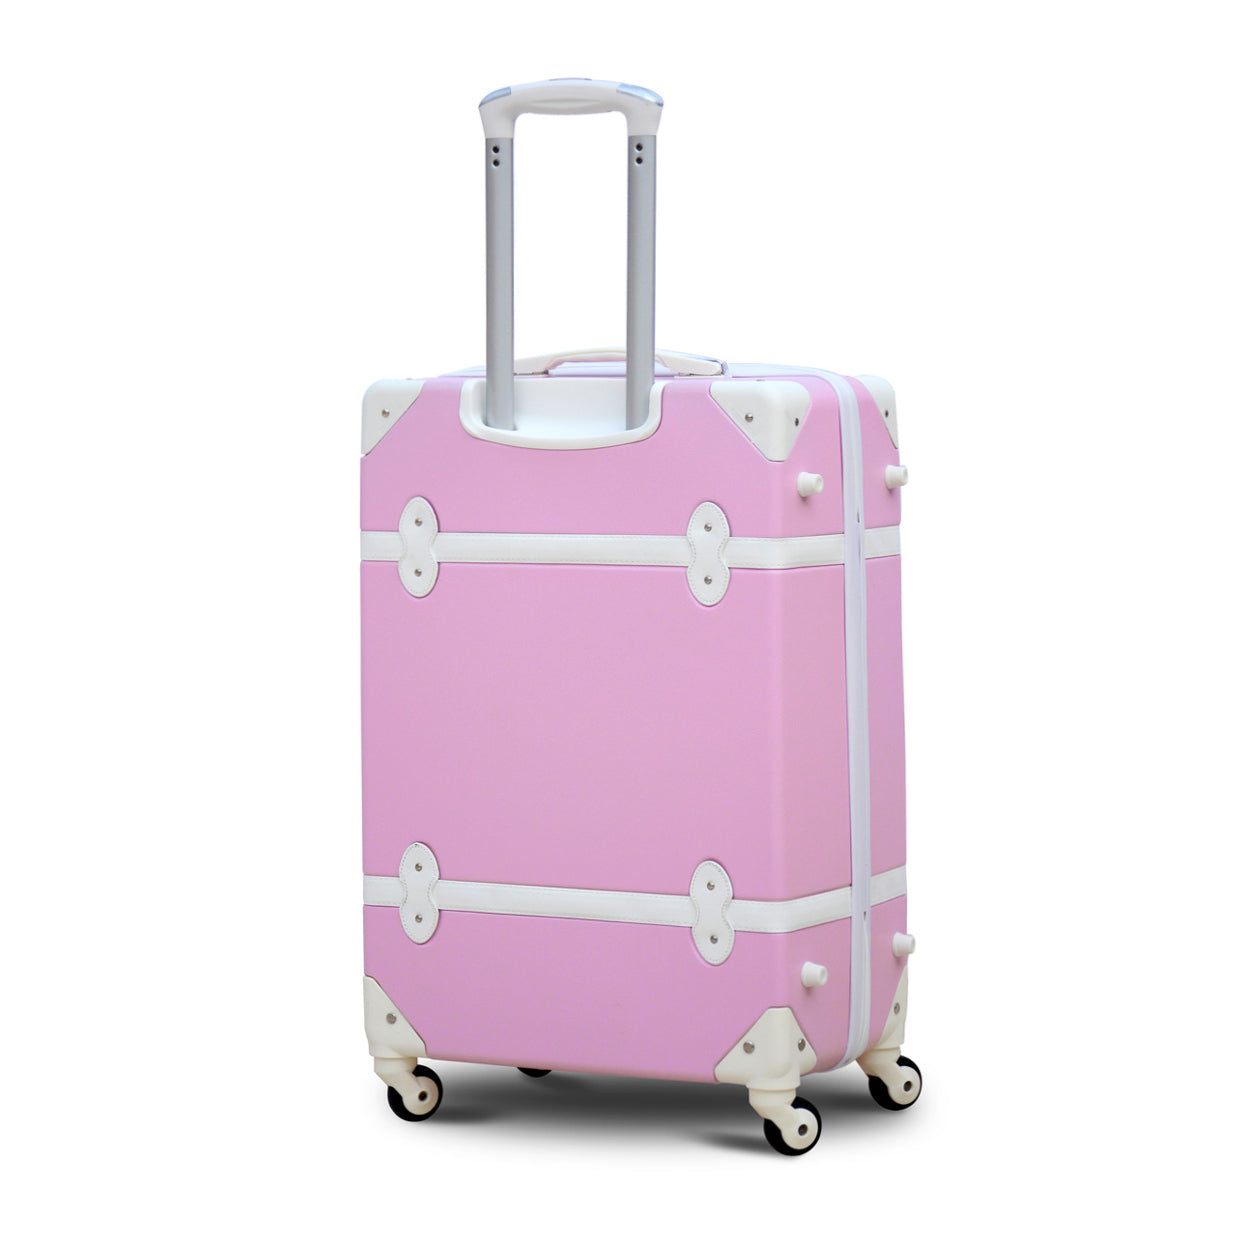 Lightweight ABS Luggage | 4 Pcs Full Set 7” 20” 24” 28 inches Corner Guard Pink Hard Case Trolley Bag